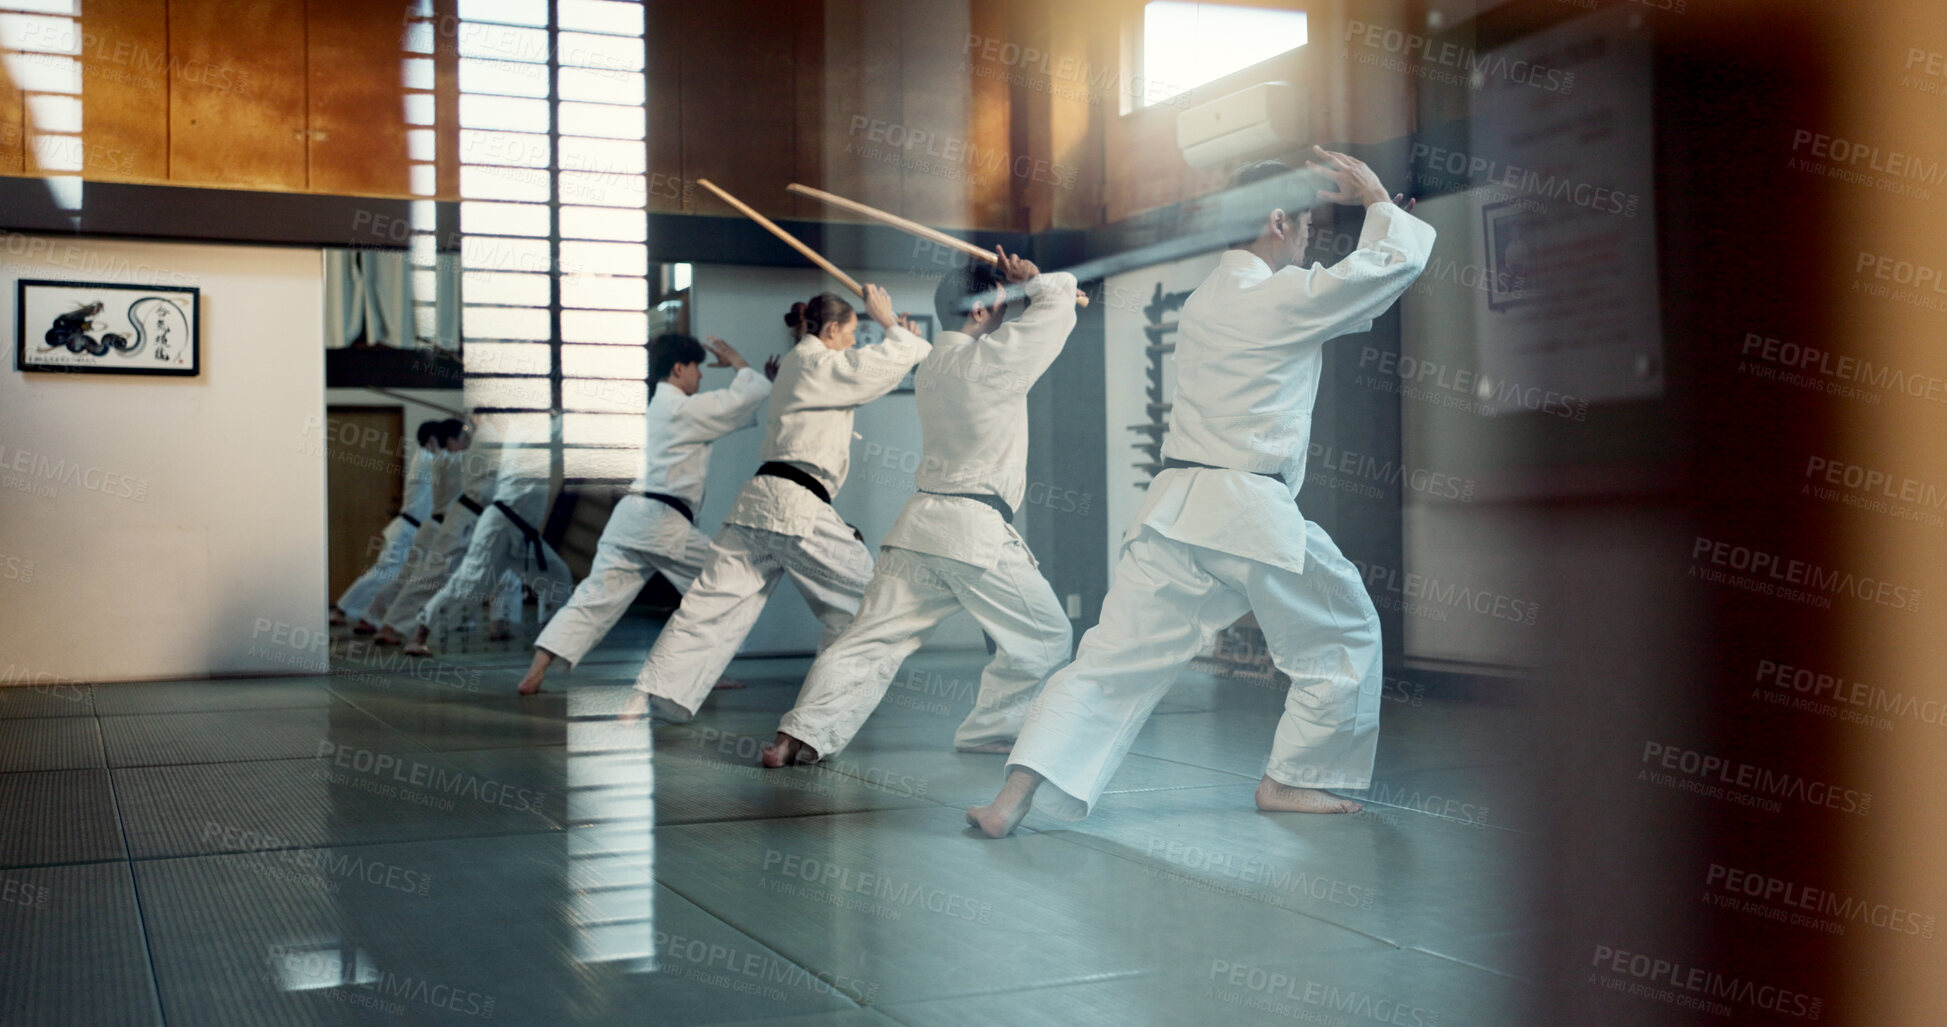 Buy stock photo Aikido, dojo class and people training for self defense, combat and Japanese group practice sword technique. Black belt students, transparent window and learning martial arts for safety protection